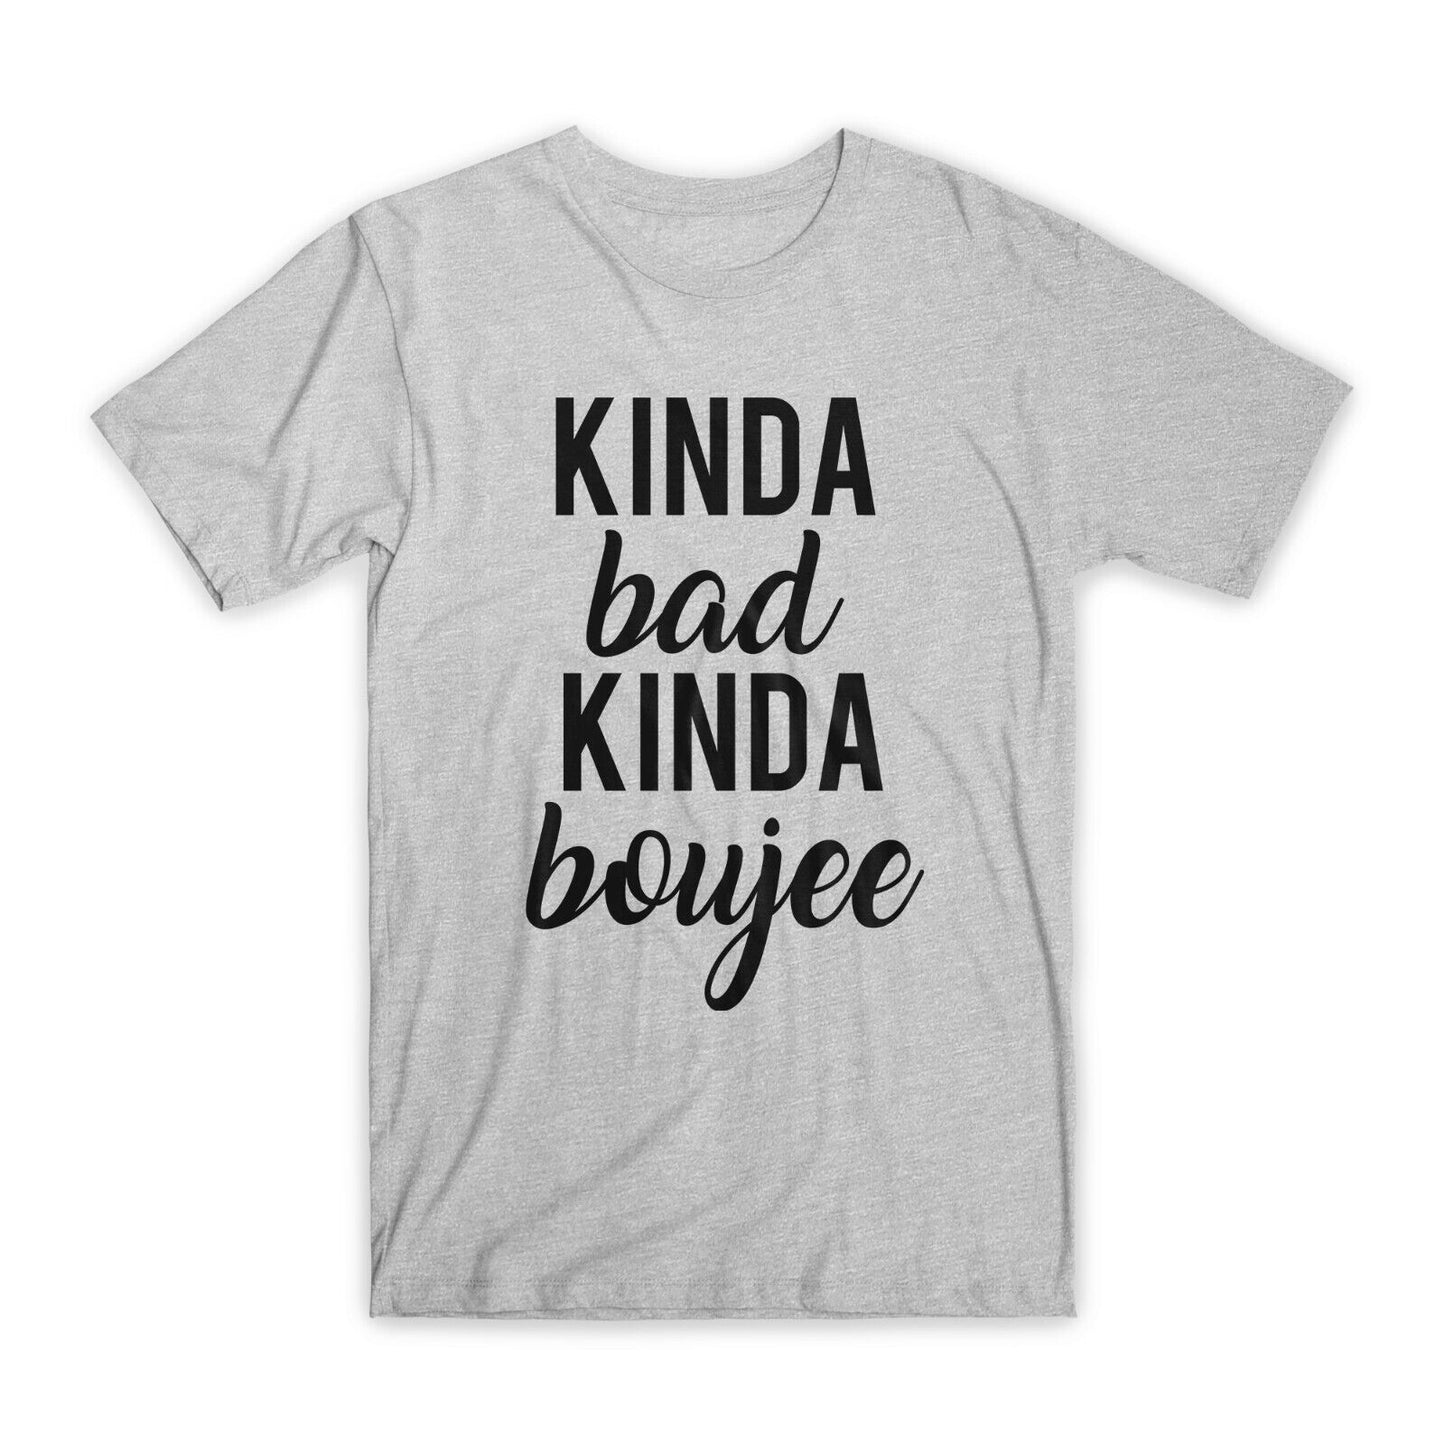 Kind A Bad Kind A Boujee T-Shirt Premium Soft Cotton Funny Tees Novelty Gift NEW